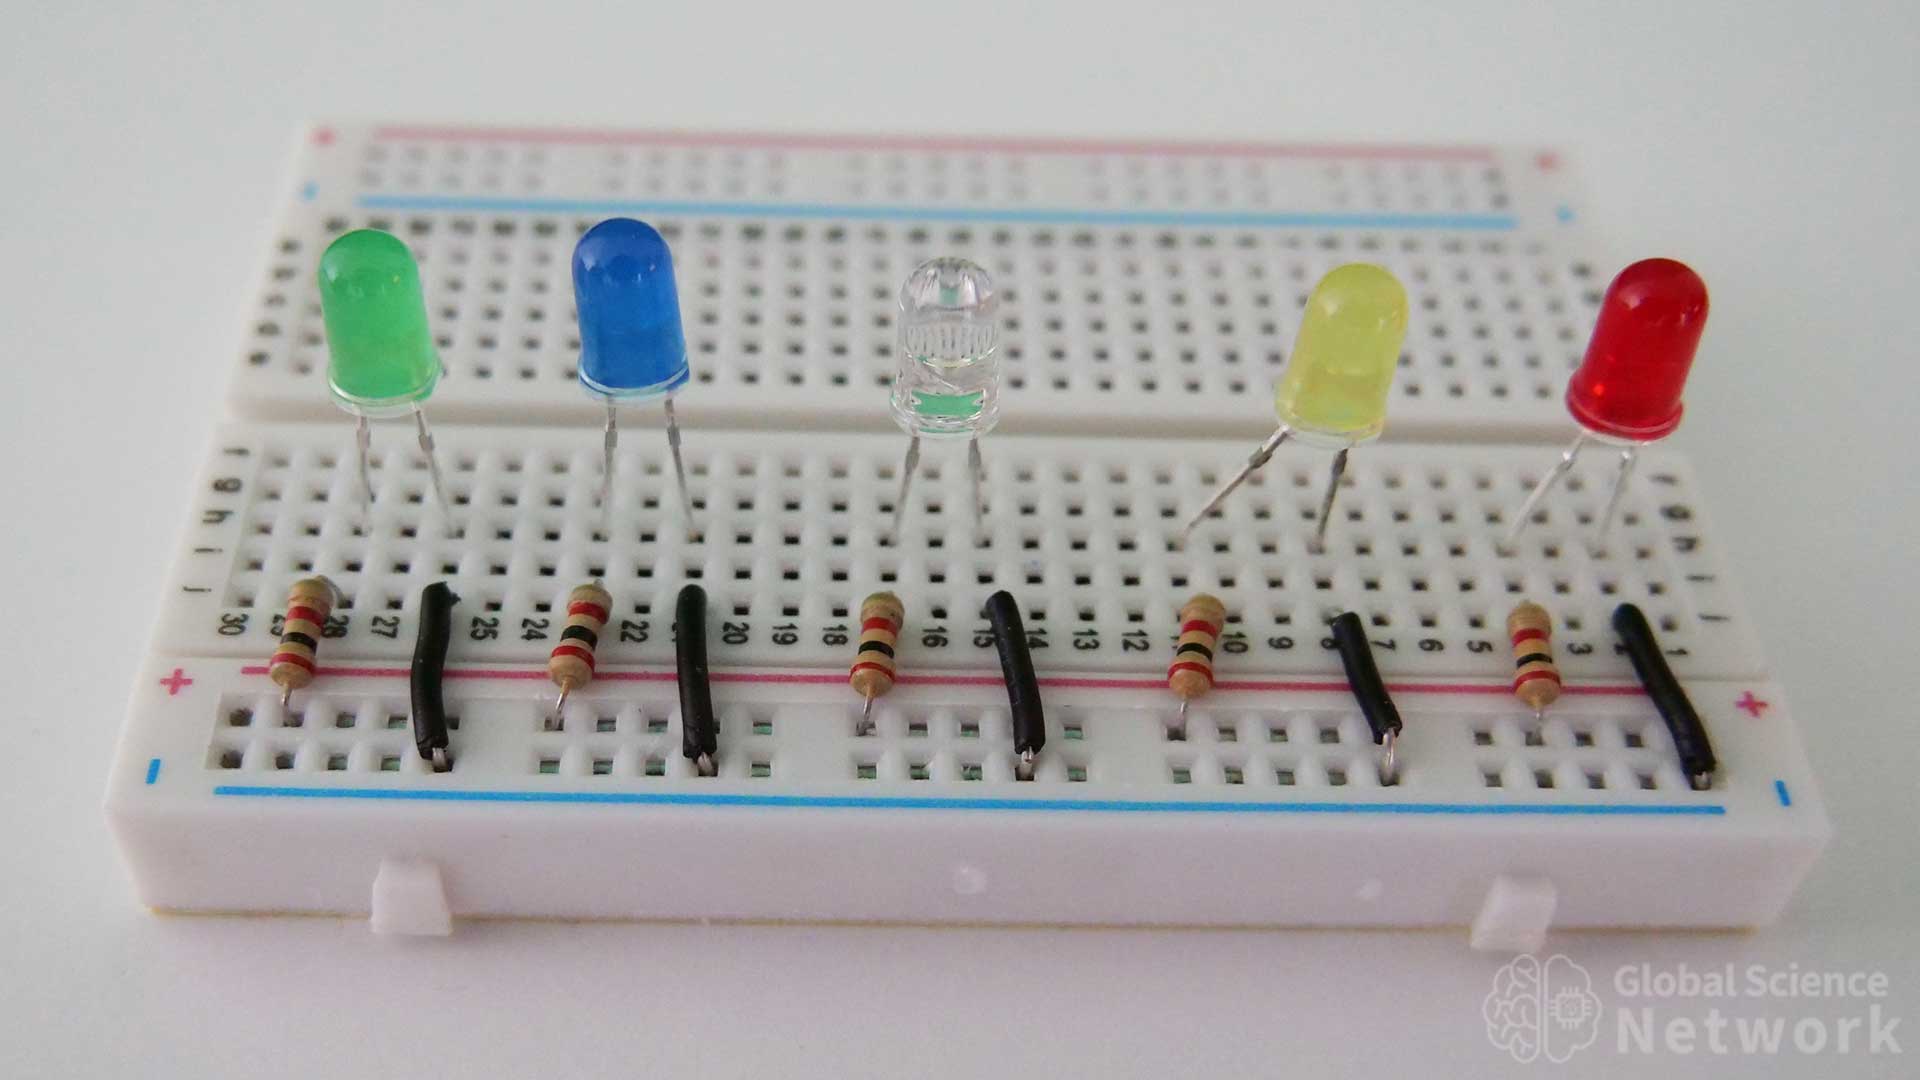 green blue white yellow and red LED on a breadboard with current limiting resistors